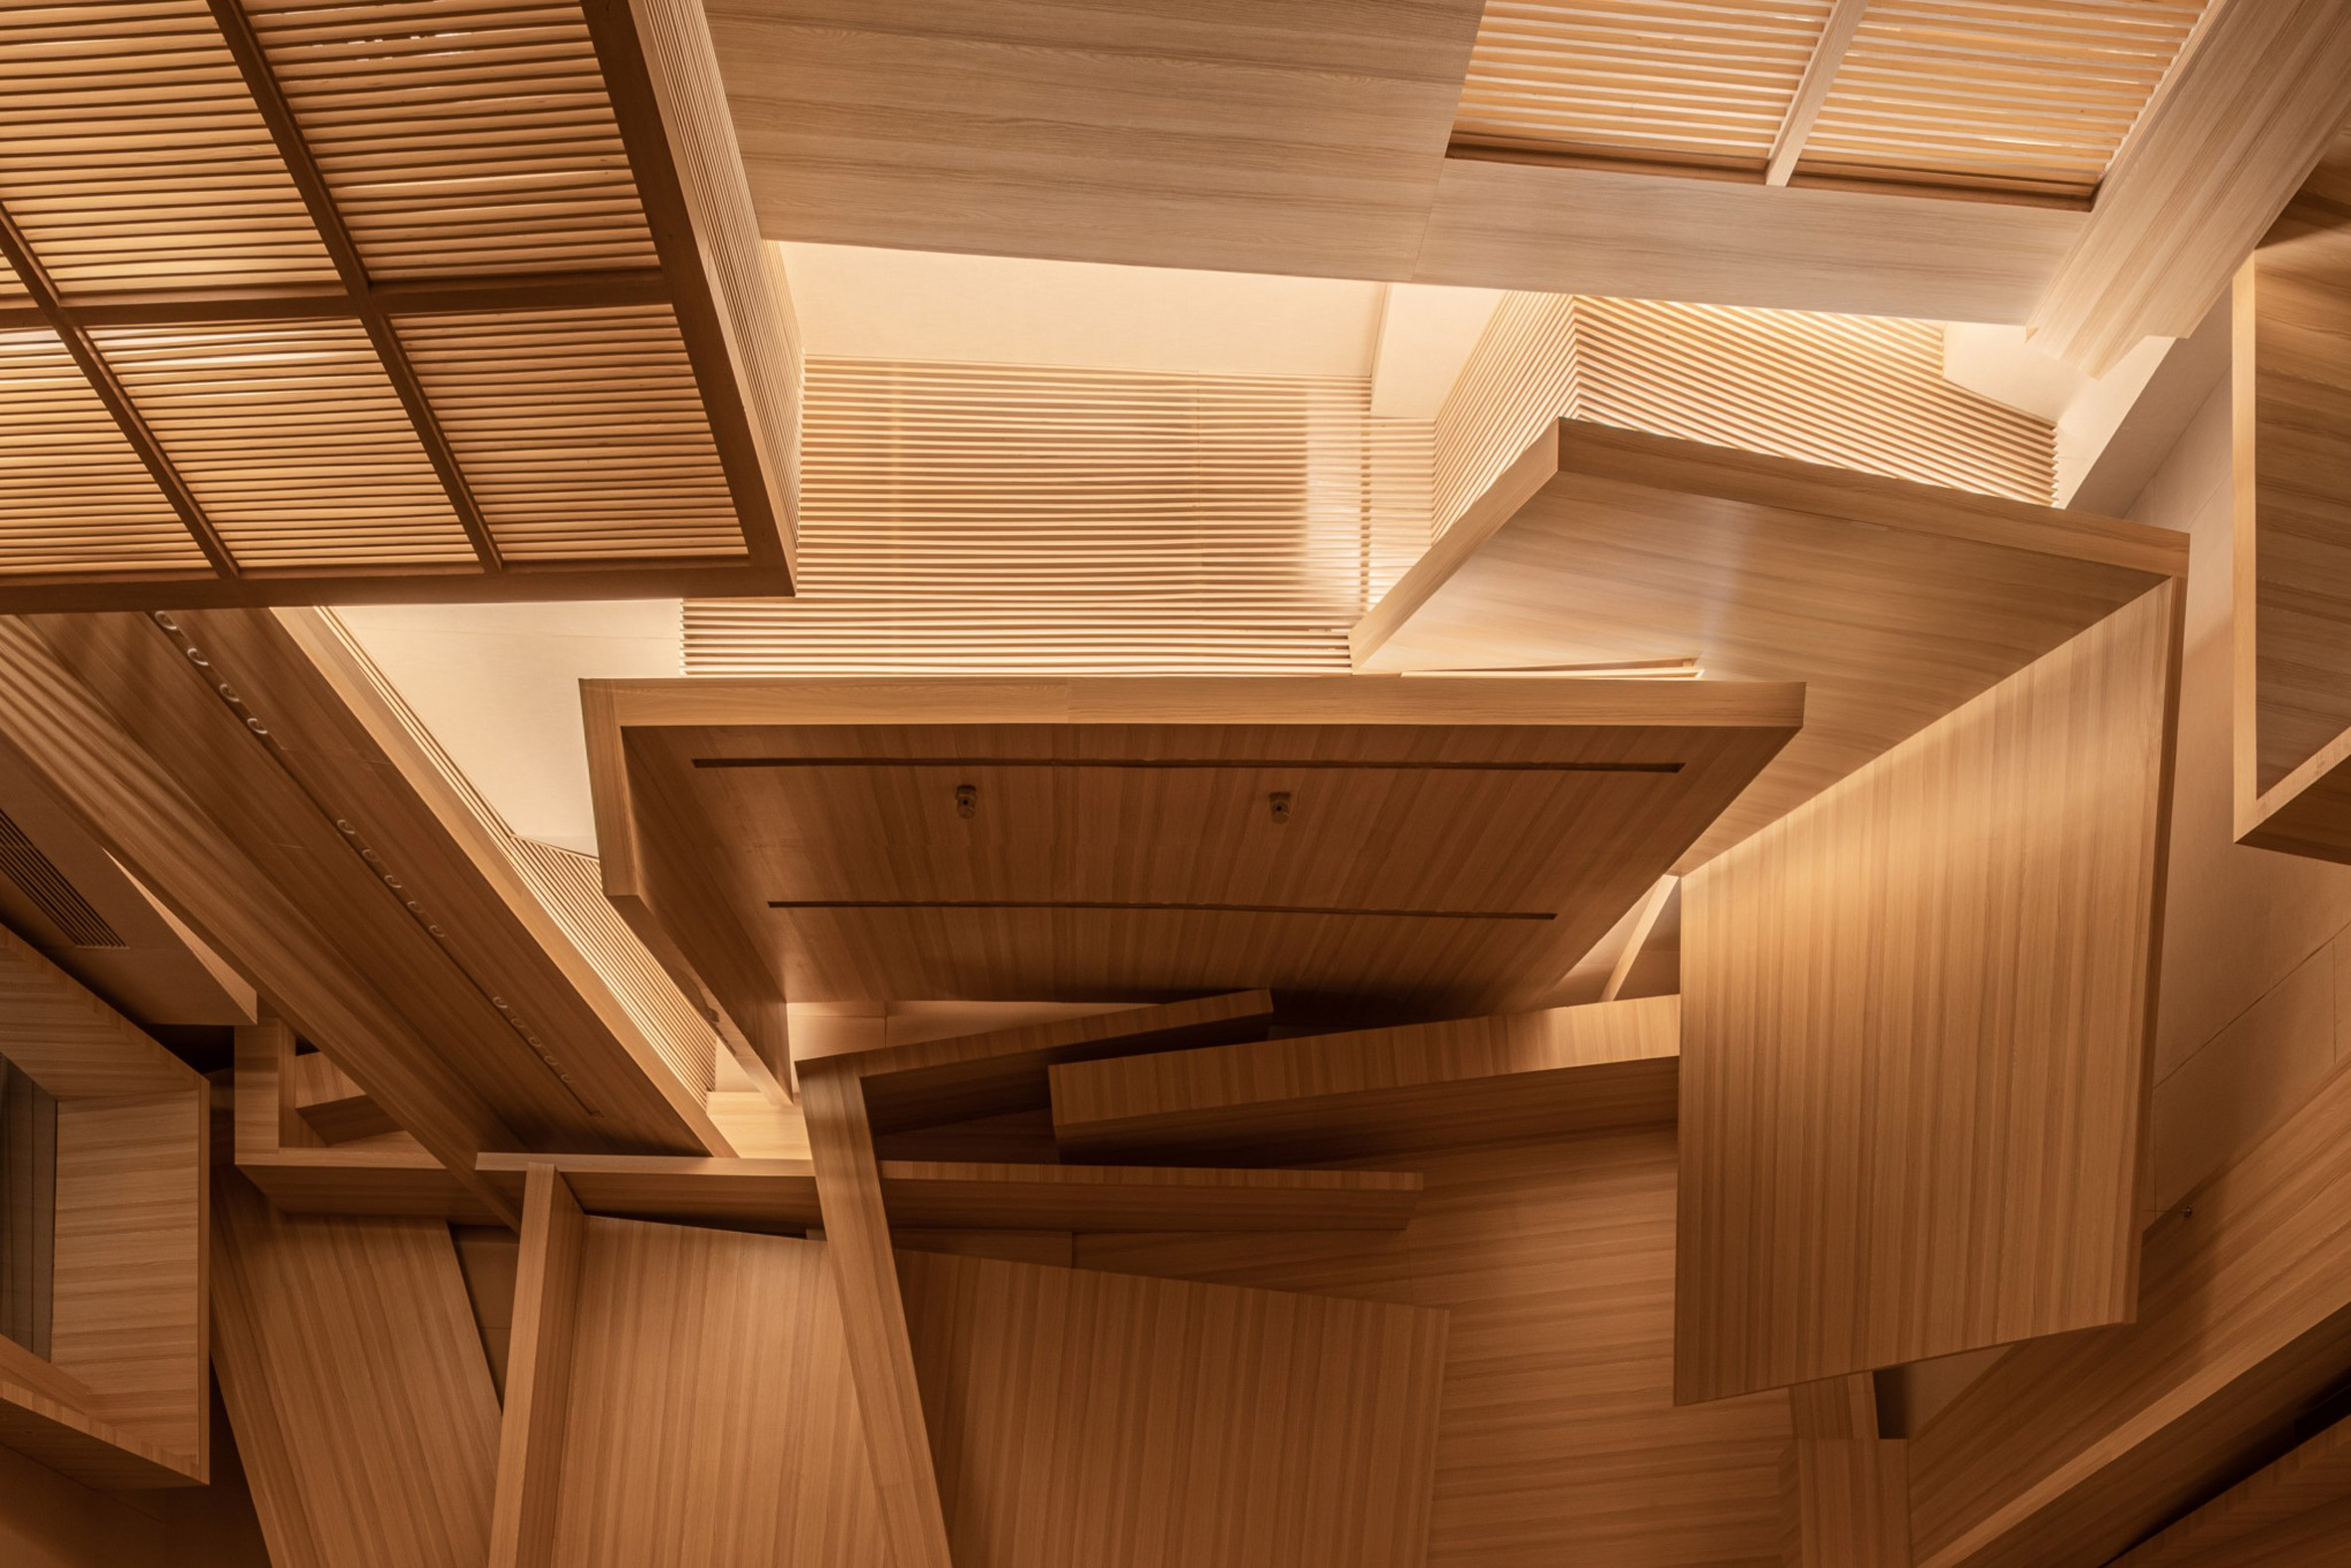 A wooden ceiling and walls inside Meilan Music Studio